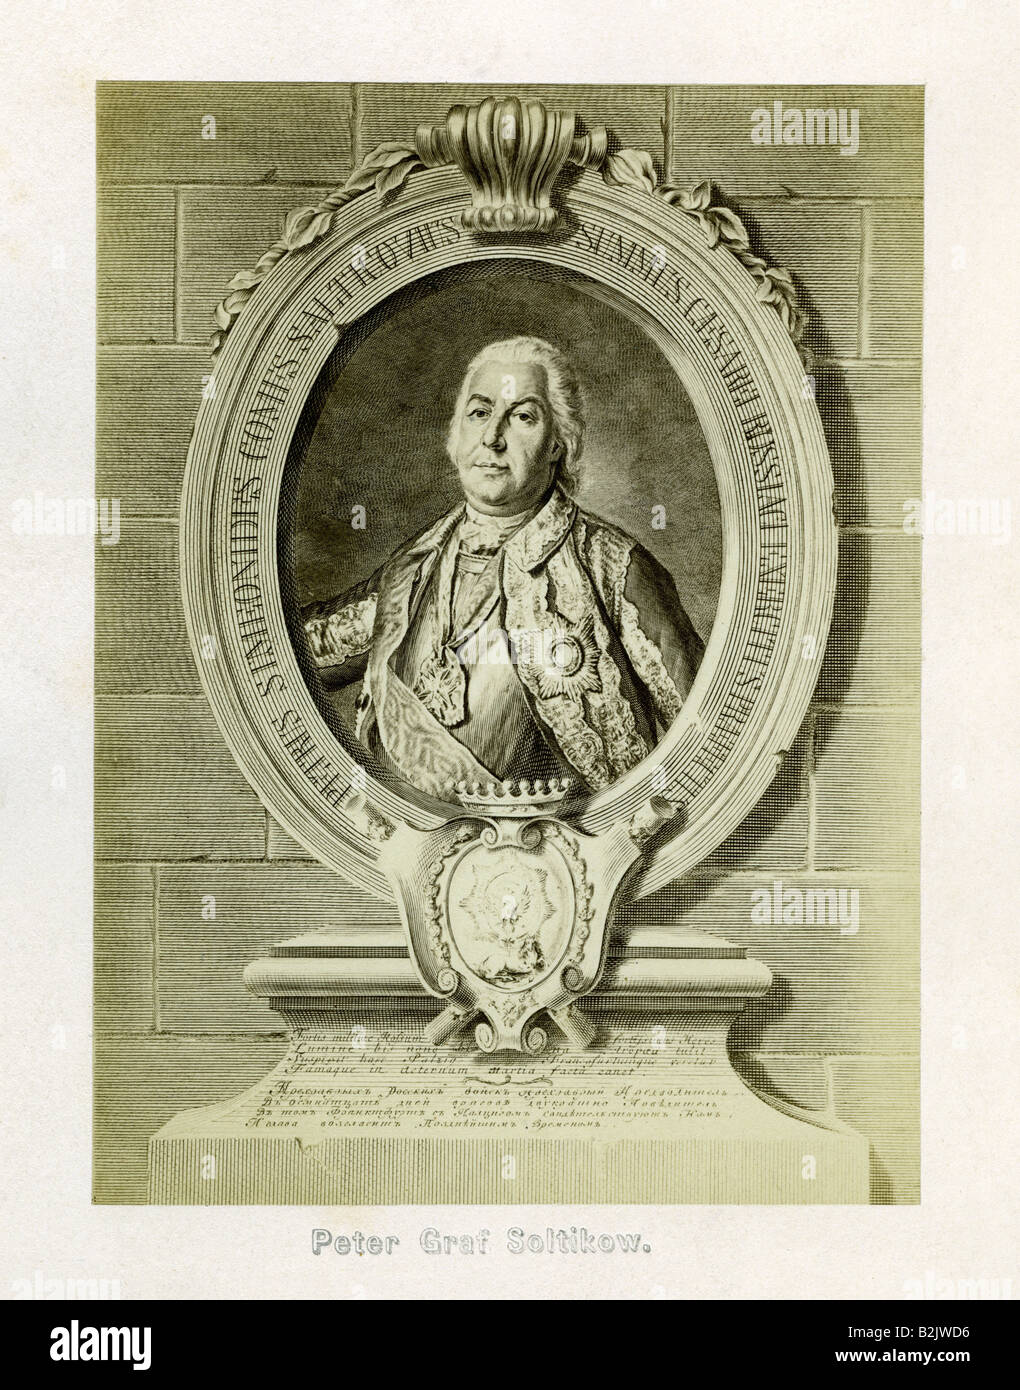 Saltykov, Count Pyotr Semyonovich, circa 1698 - 15.12.1772, Russian field marshal, half length, copper engraving, Vienna, Austria, 18th century, Artist's Copyright has not to be cleared Stock Photo